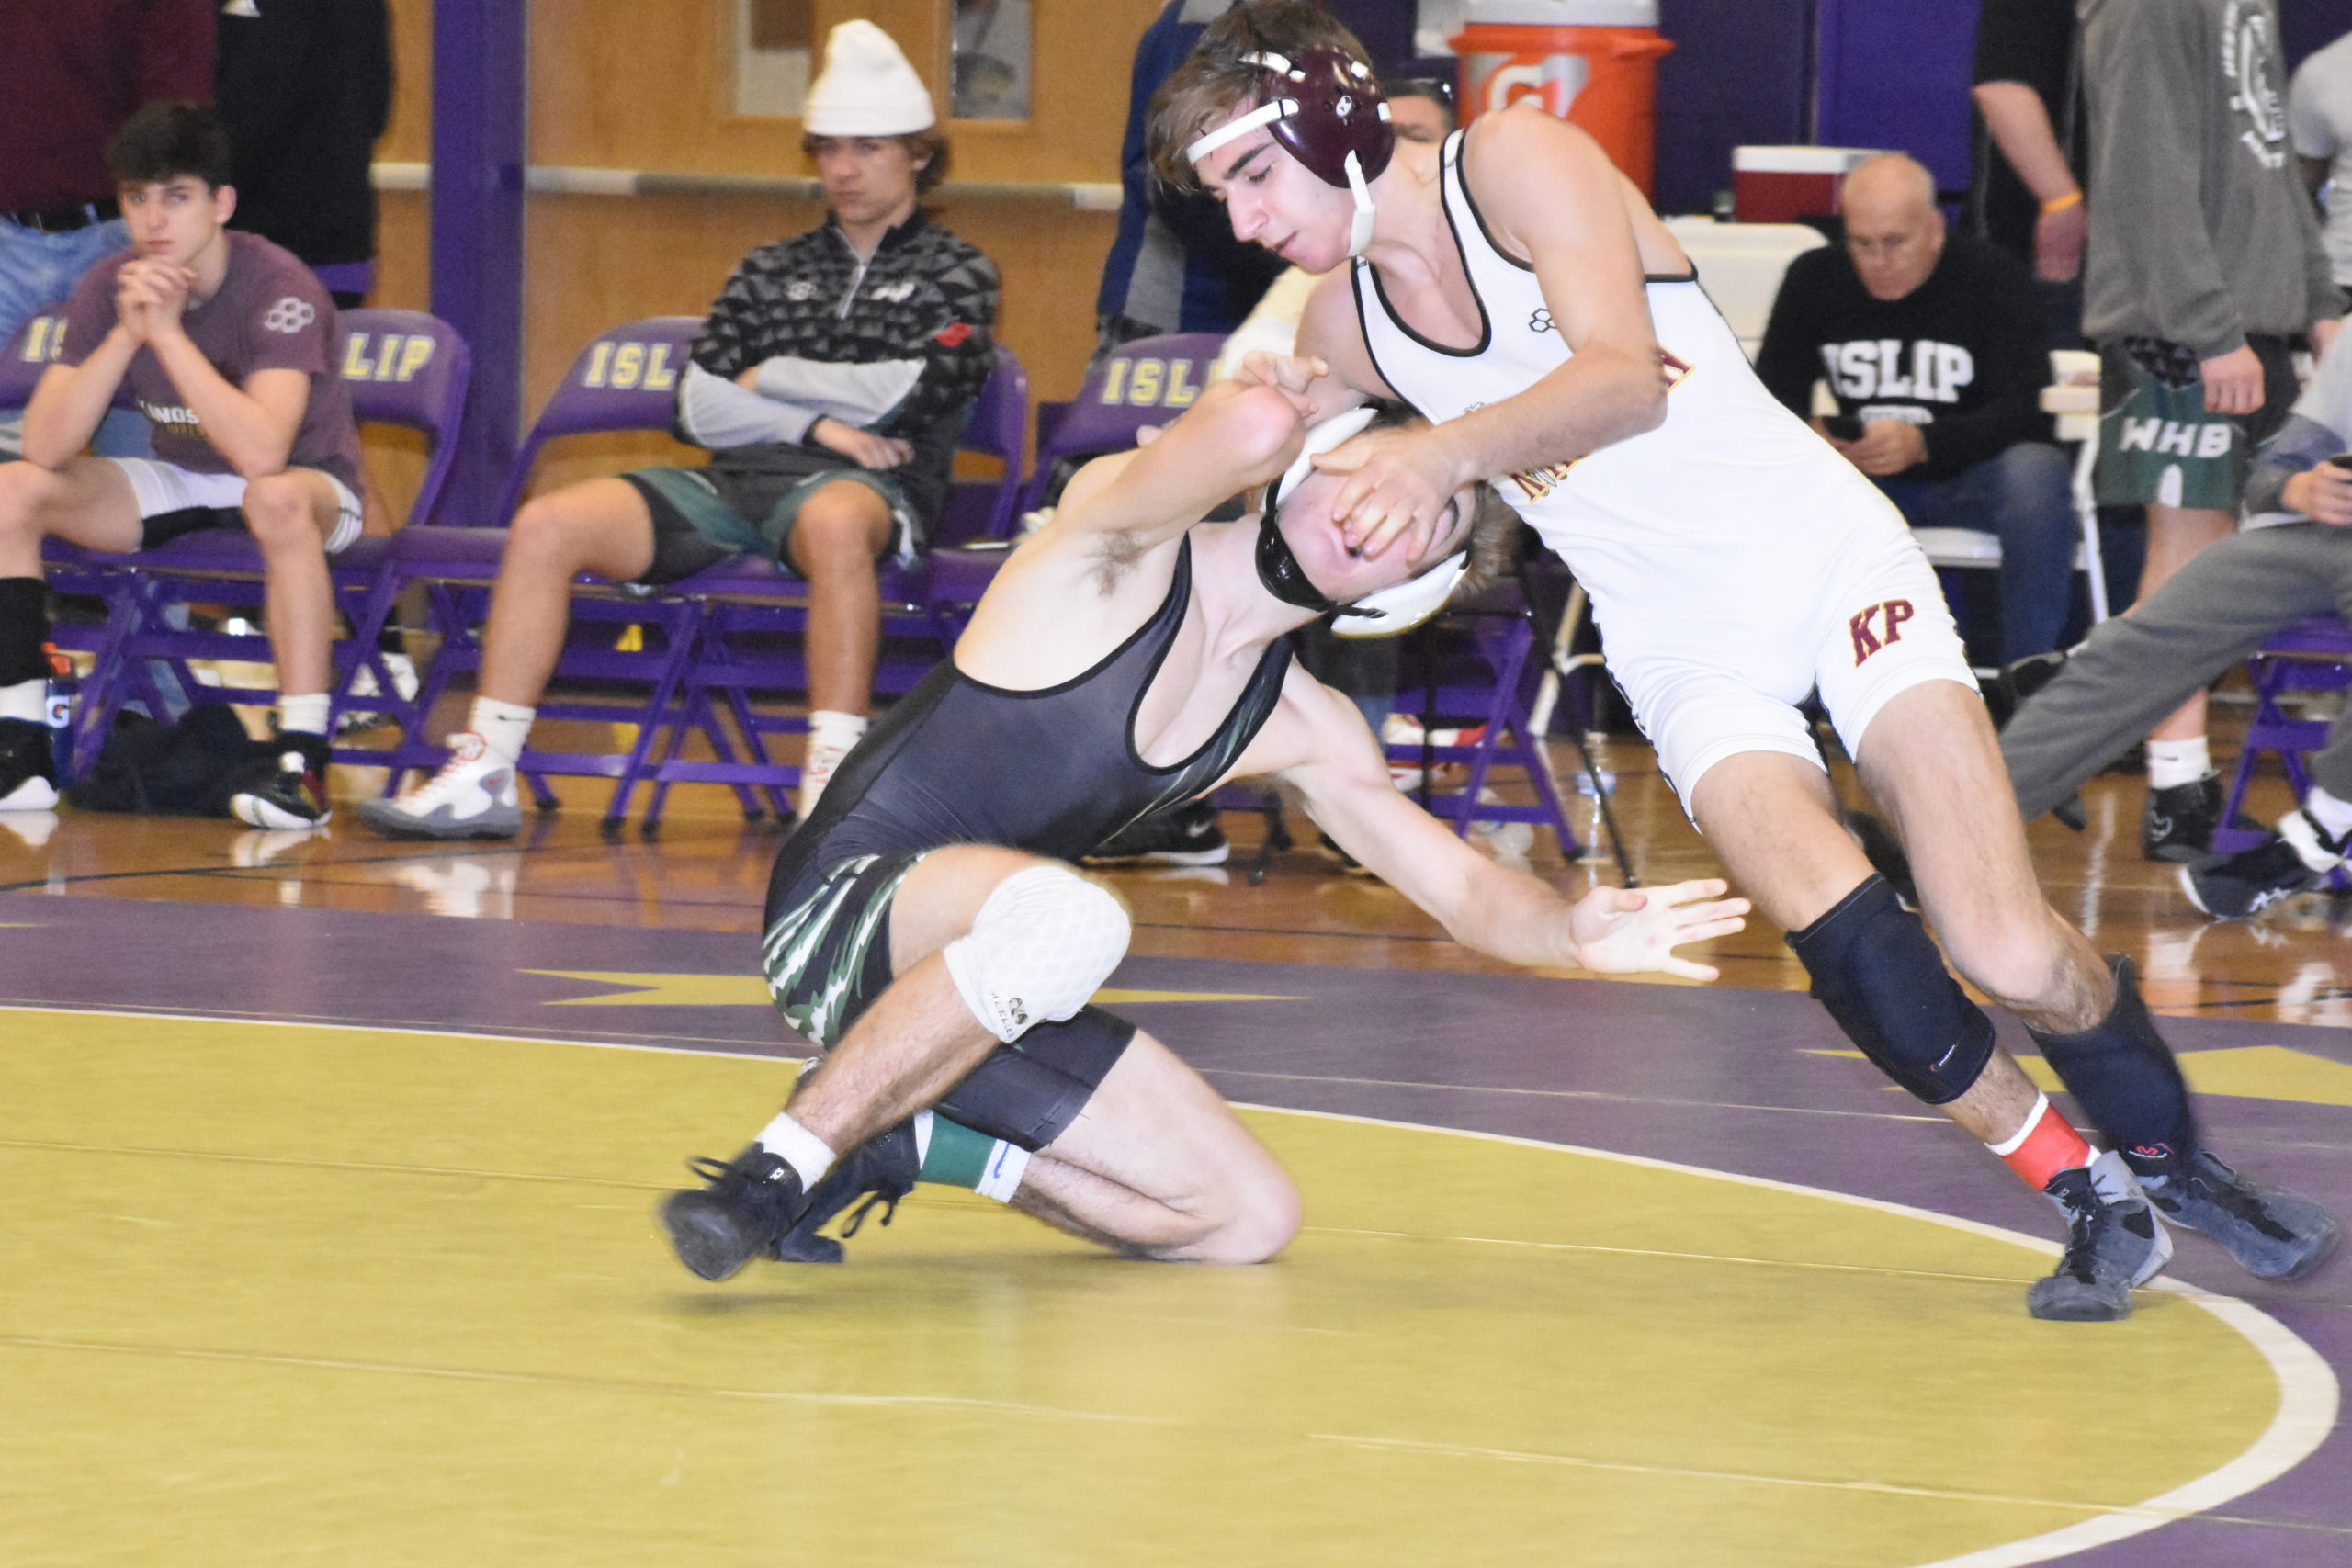 Westhampton Beach junior Grant Skala looks for an opening on Vincent Ziccardi of Kings Park in their finals match.